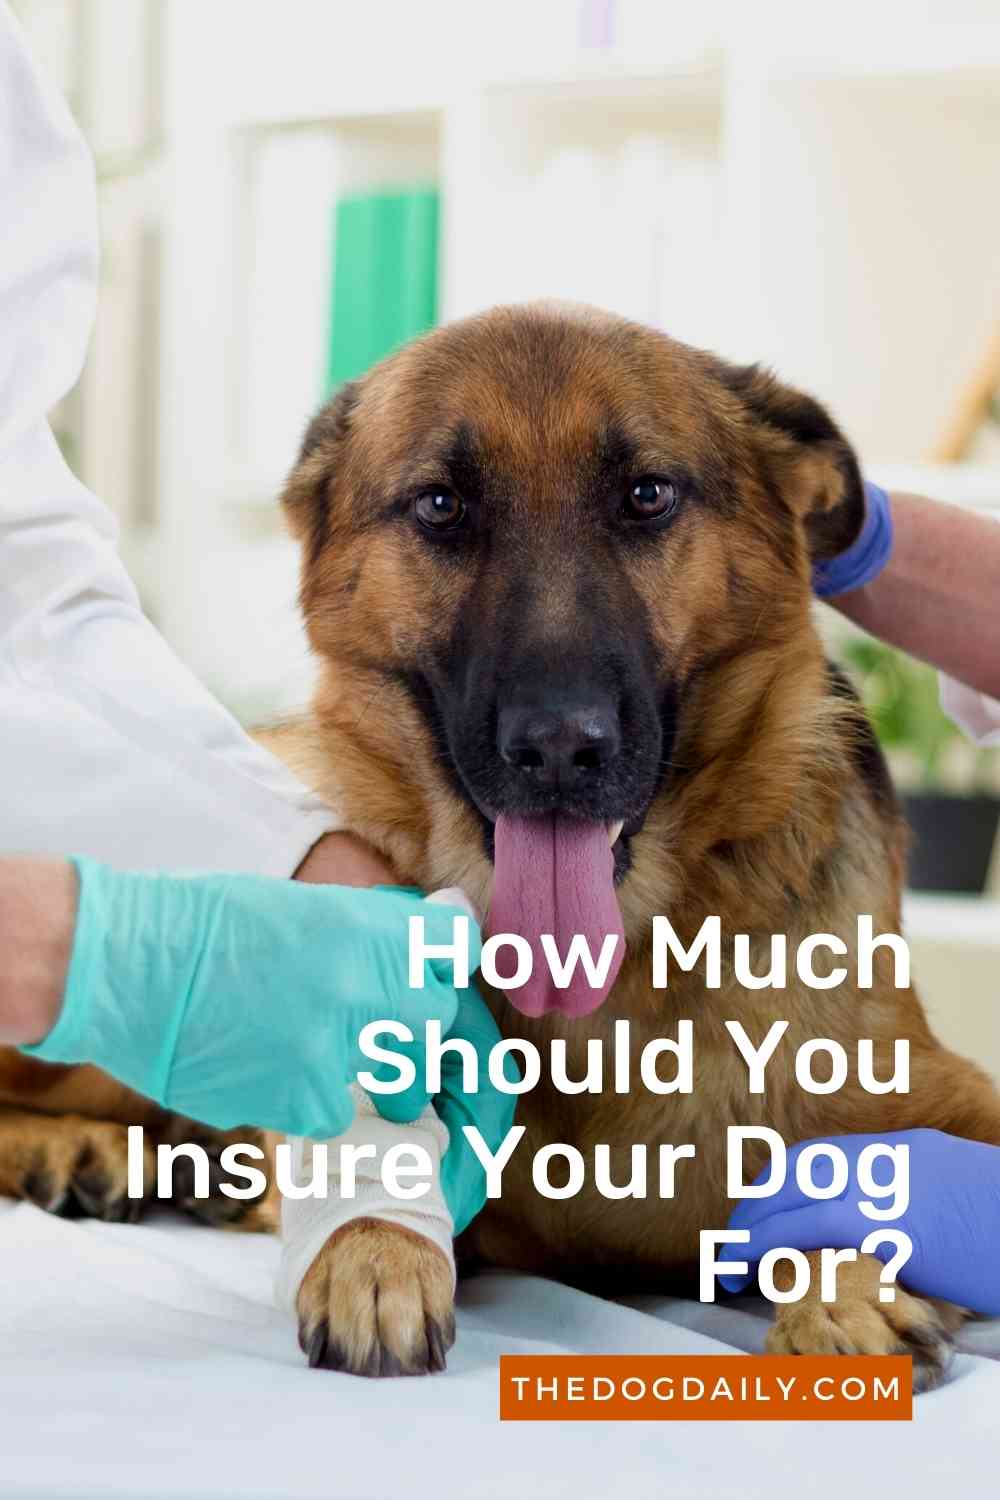 Is Pet Insurance the Right Investment For You and Your Dog?